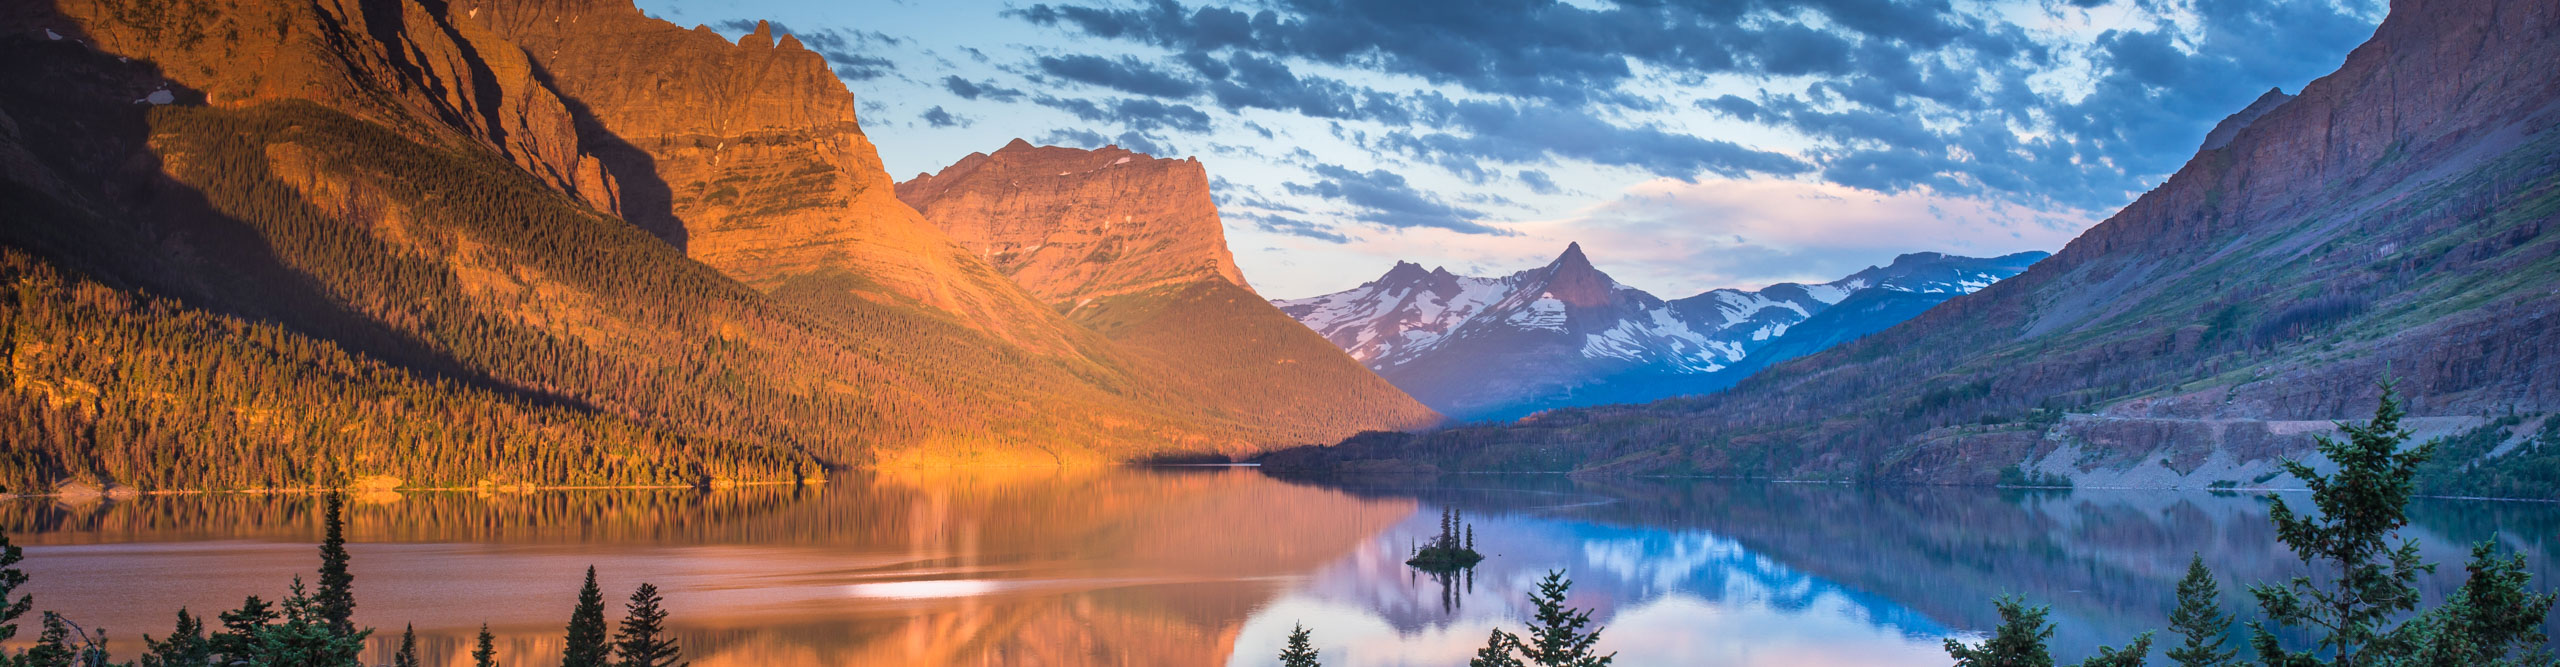 Sunrise with red mountain and a blue sky at Wild Goose Island, Glacier National Park, Montana, USA